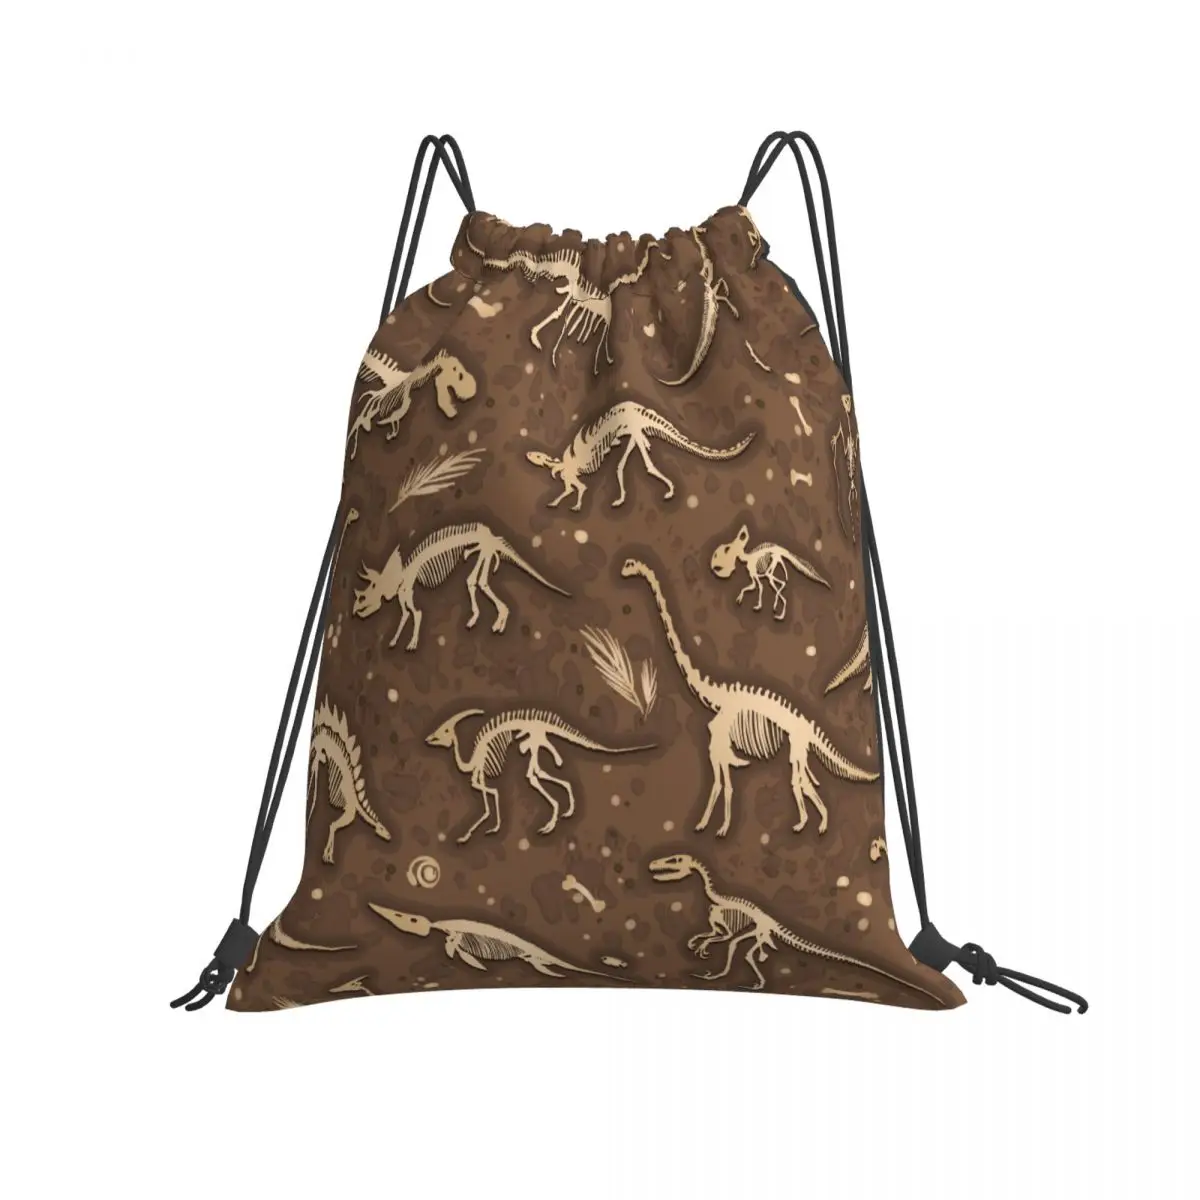 Foldable Gym Bag Fossils Dinosaurs Silhouettes Fitness Backpack Drawstring Hiking Camping Swimming Sports Bag